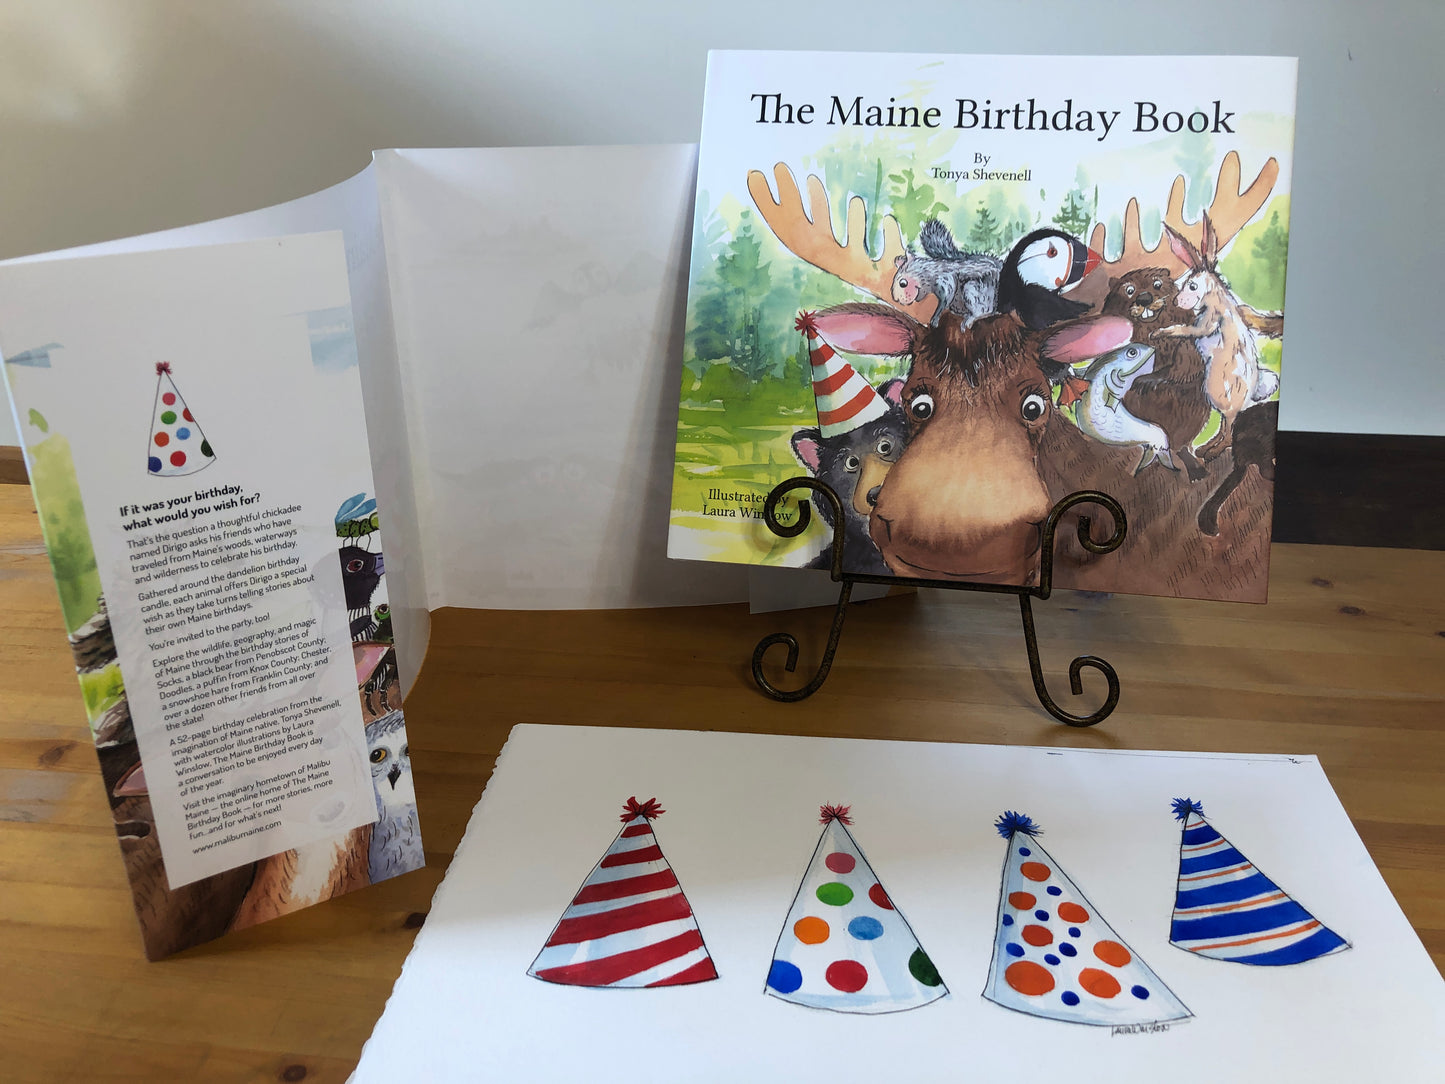 Party Hats - Original Watercolor Painting by Laura Winslow from The Maine Birthday Book plus Book #118 from the First Printing